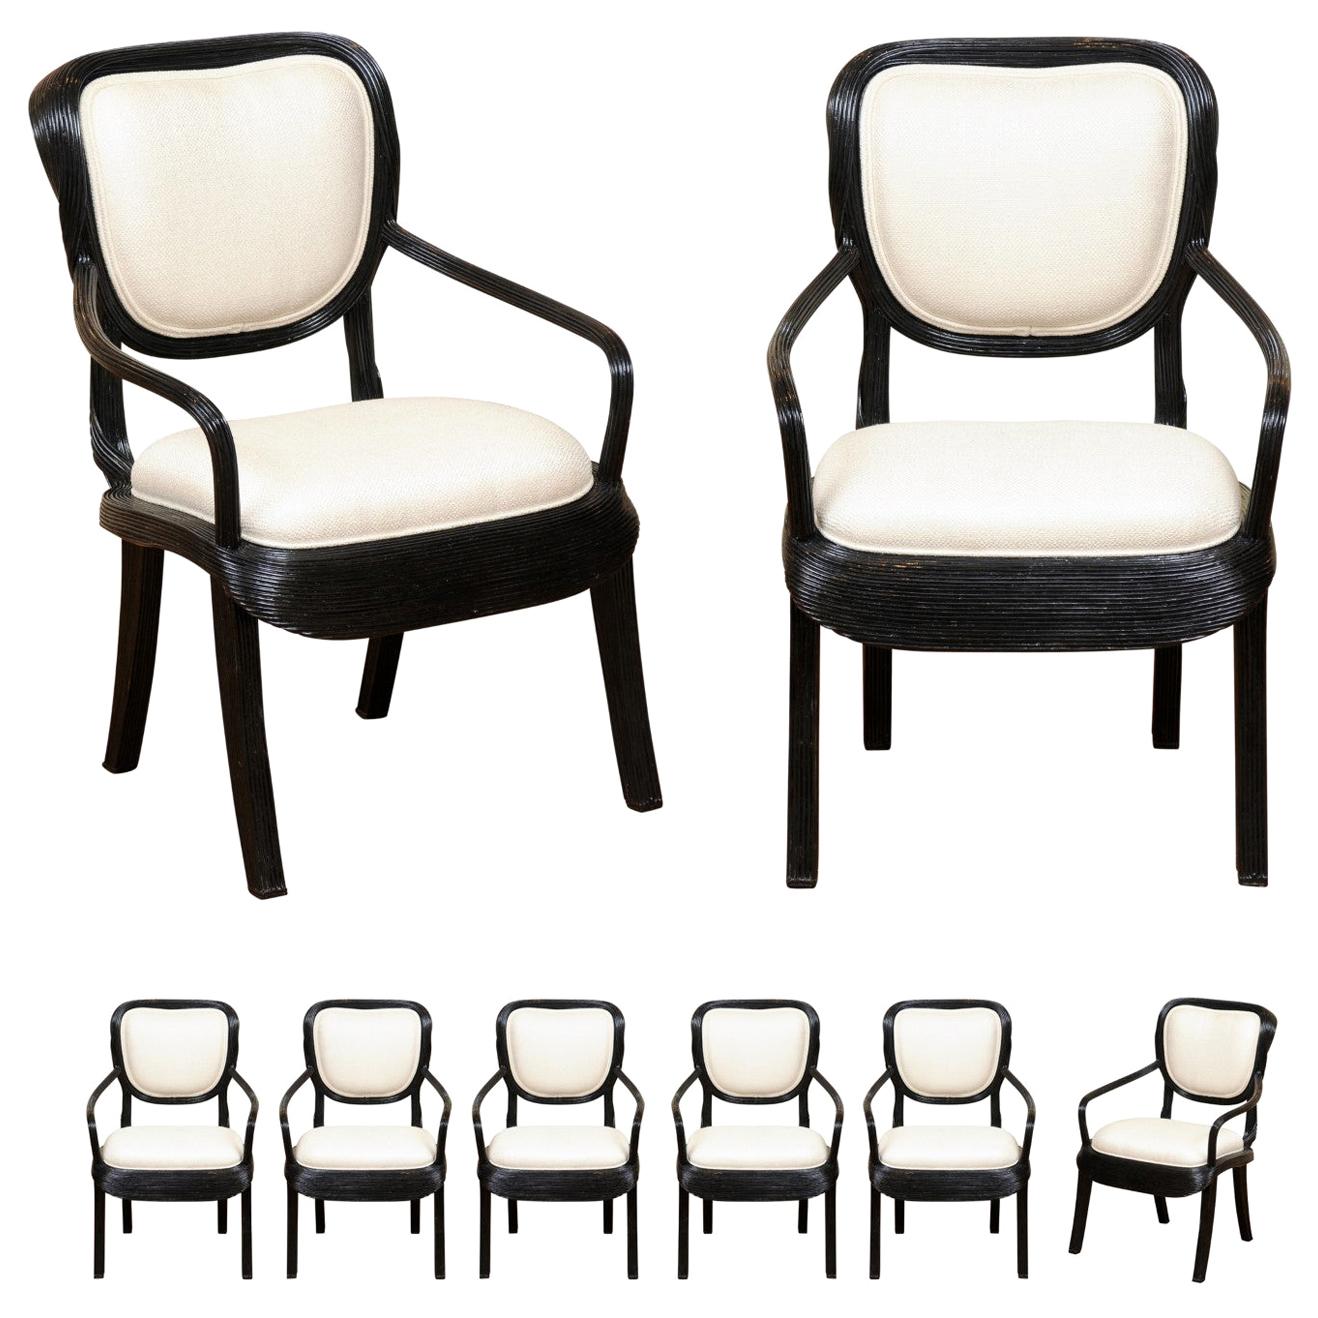 Extraordinary Set of 8 Trompe L'oiel Dining Chairs by Betty Cobonpue, circa 1980